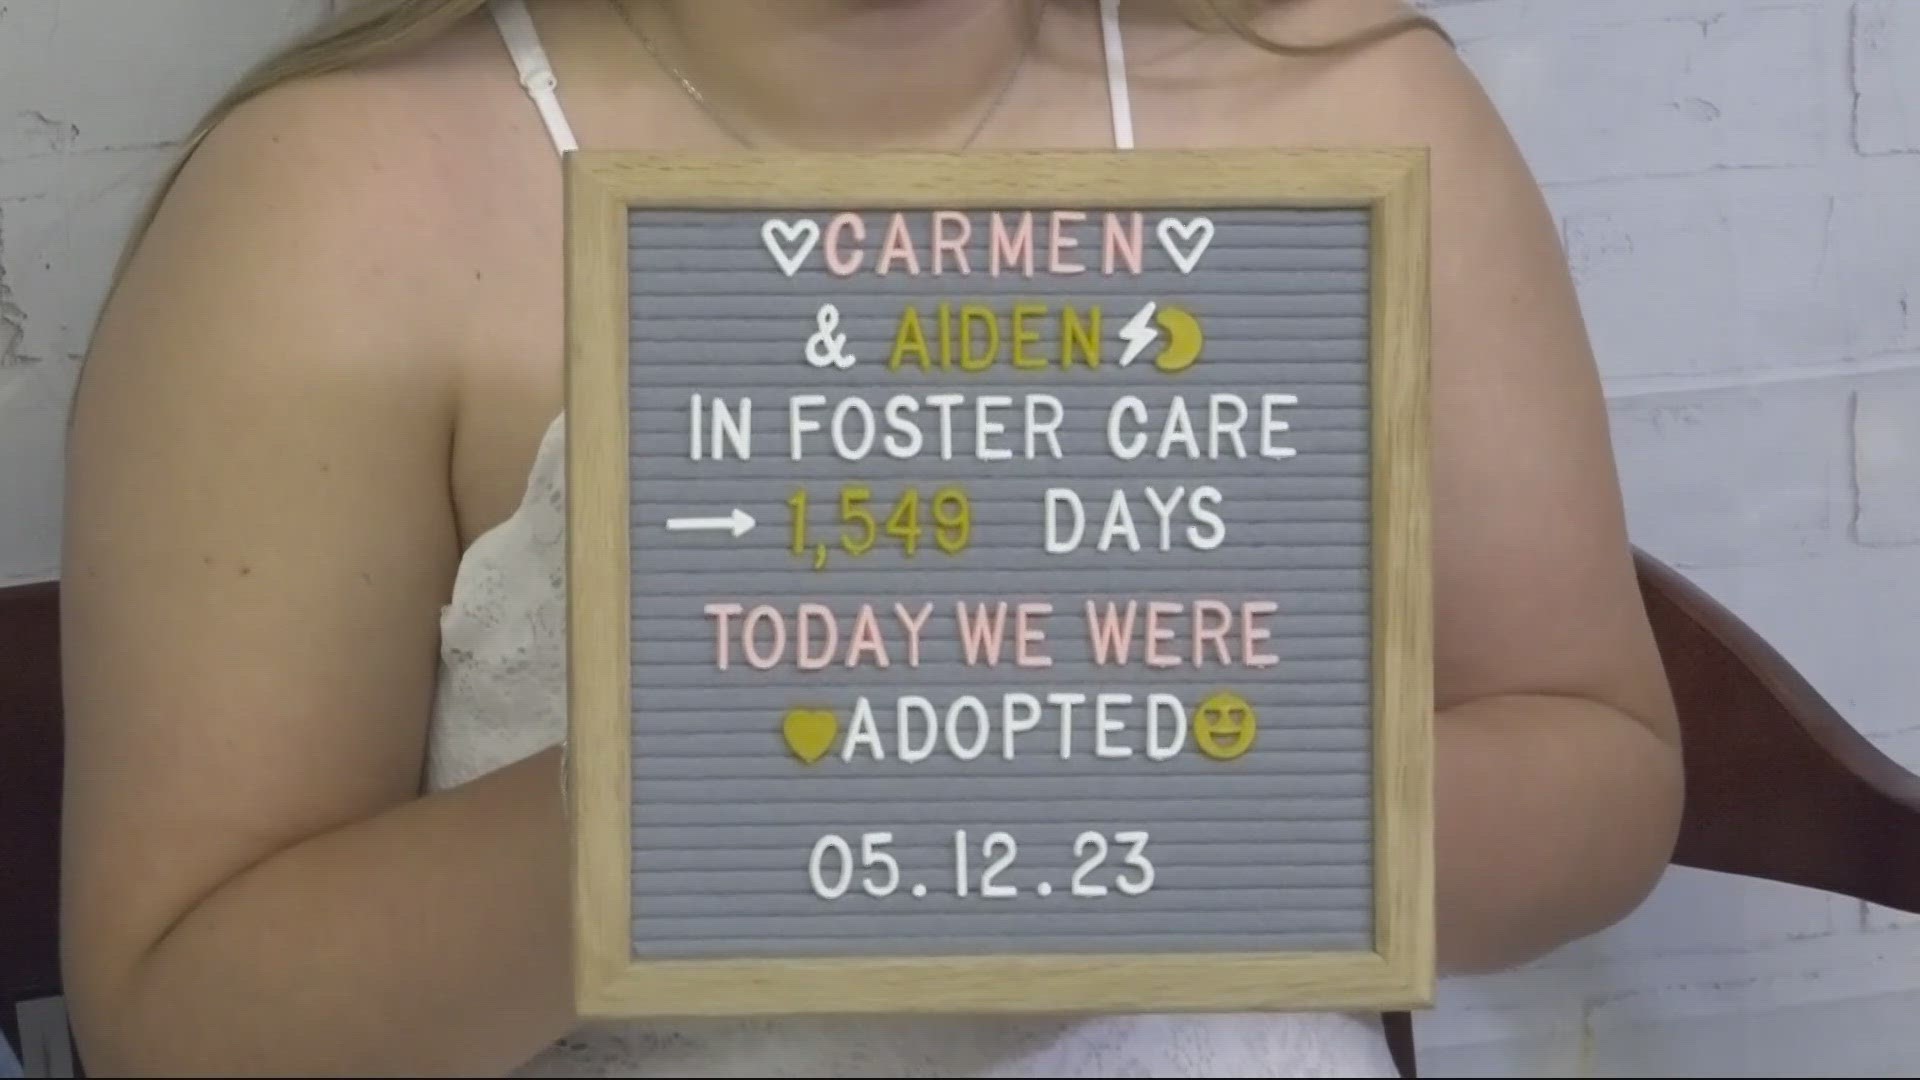 The adoption ceremony was held ahead of Mother's Day in Jacksonville.